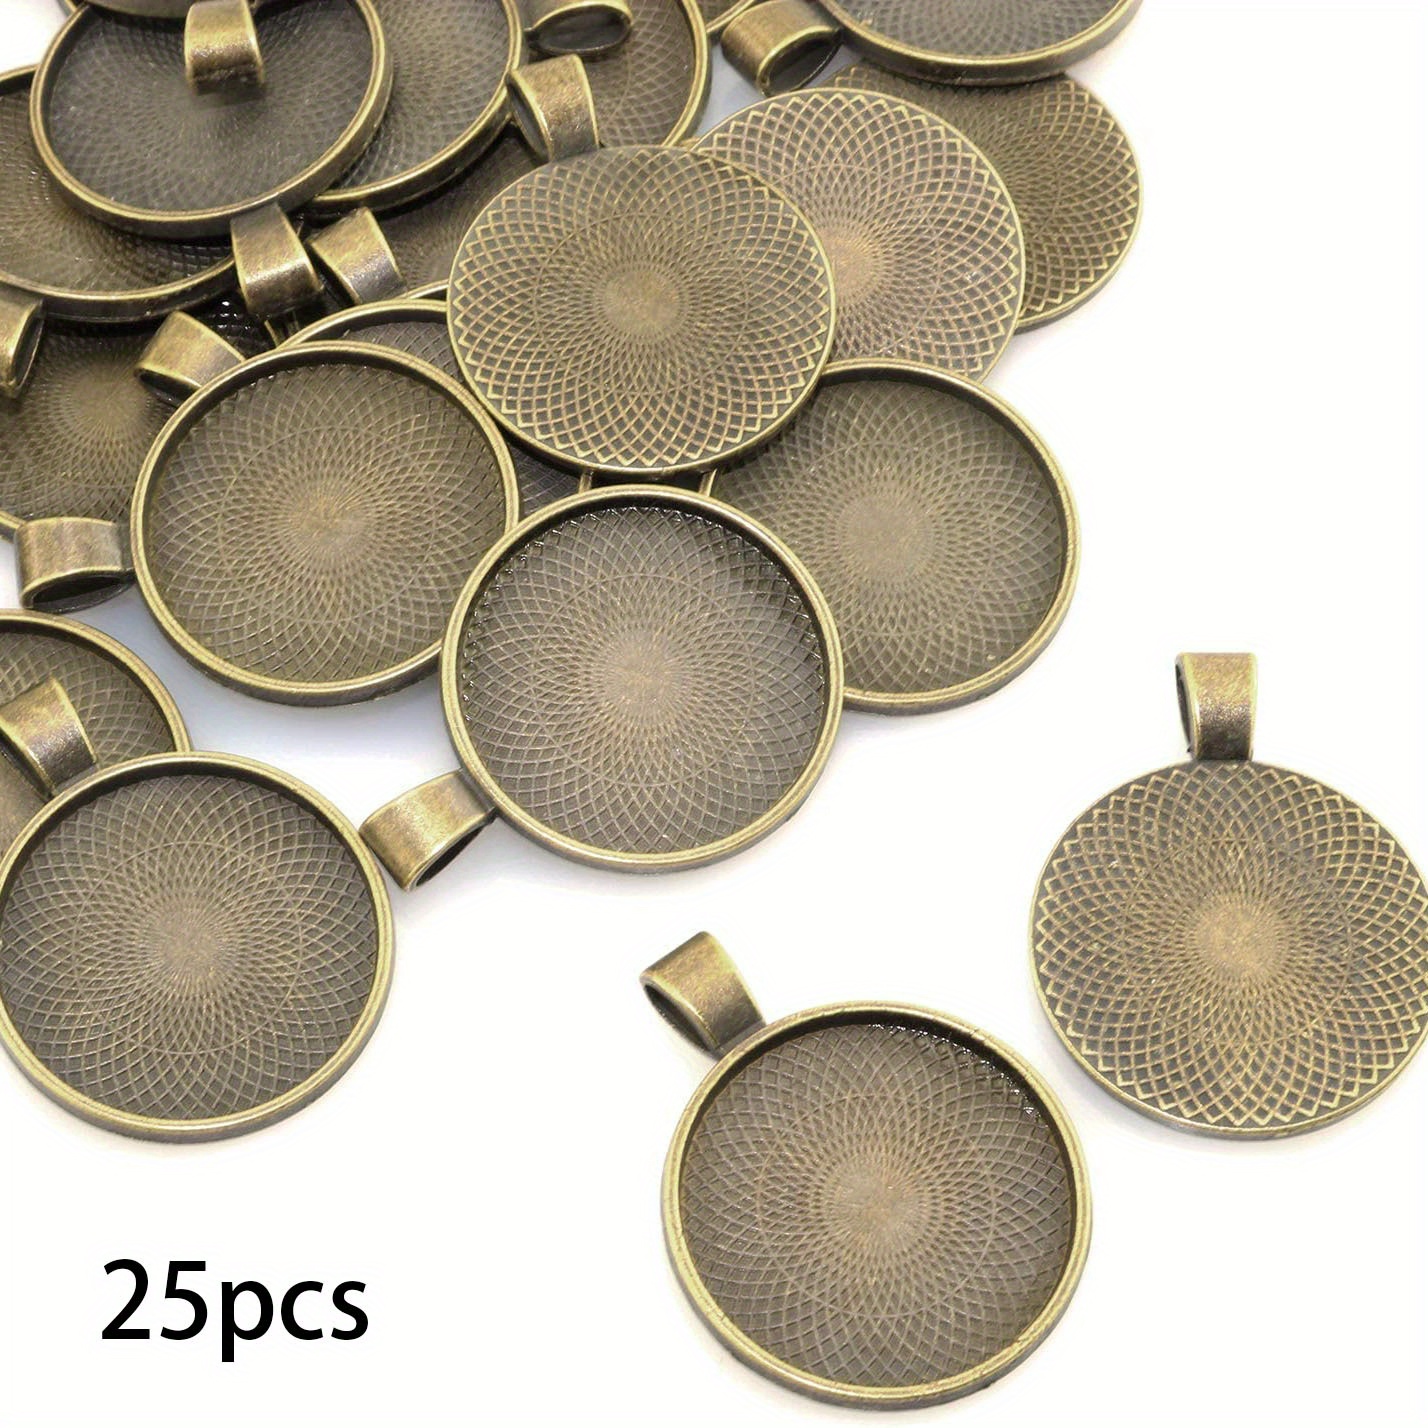 10pcs/lot 25mm Cabochon Pendant Base Settings Ancient Silver Bezels Charms  For DIY Jewelry Making Necklace Keychain Accessories